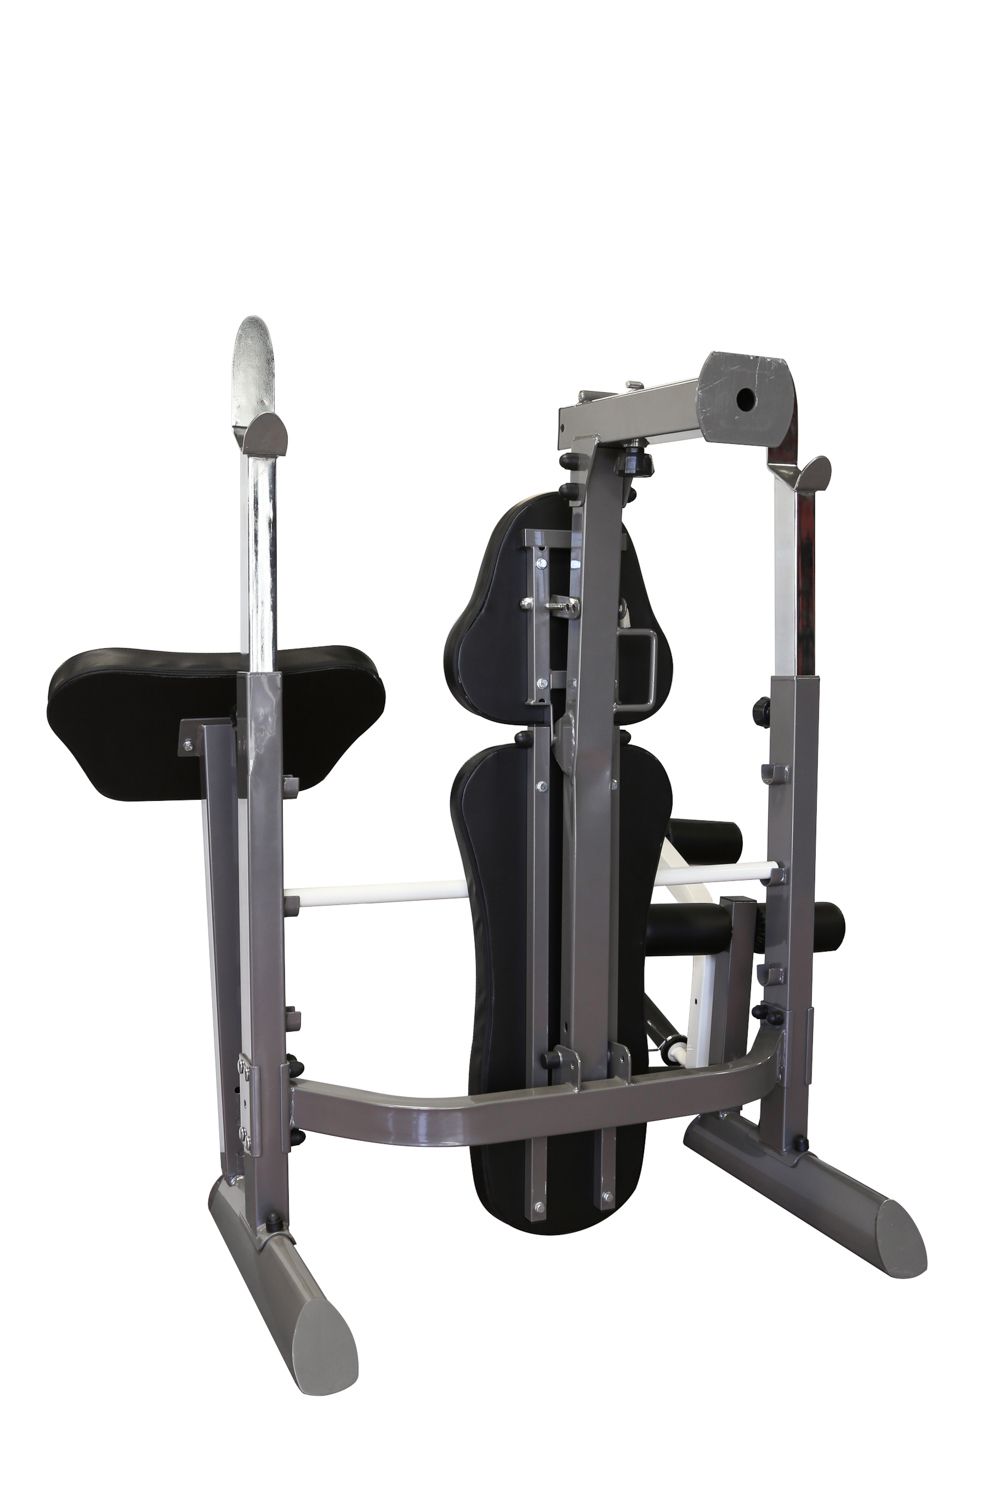 Marcy Gym Equipment | DICK'S Sporting Goods